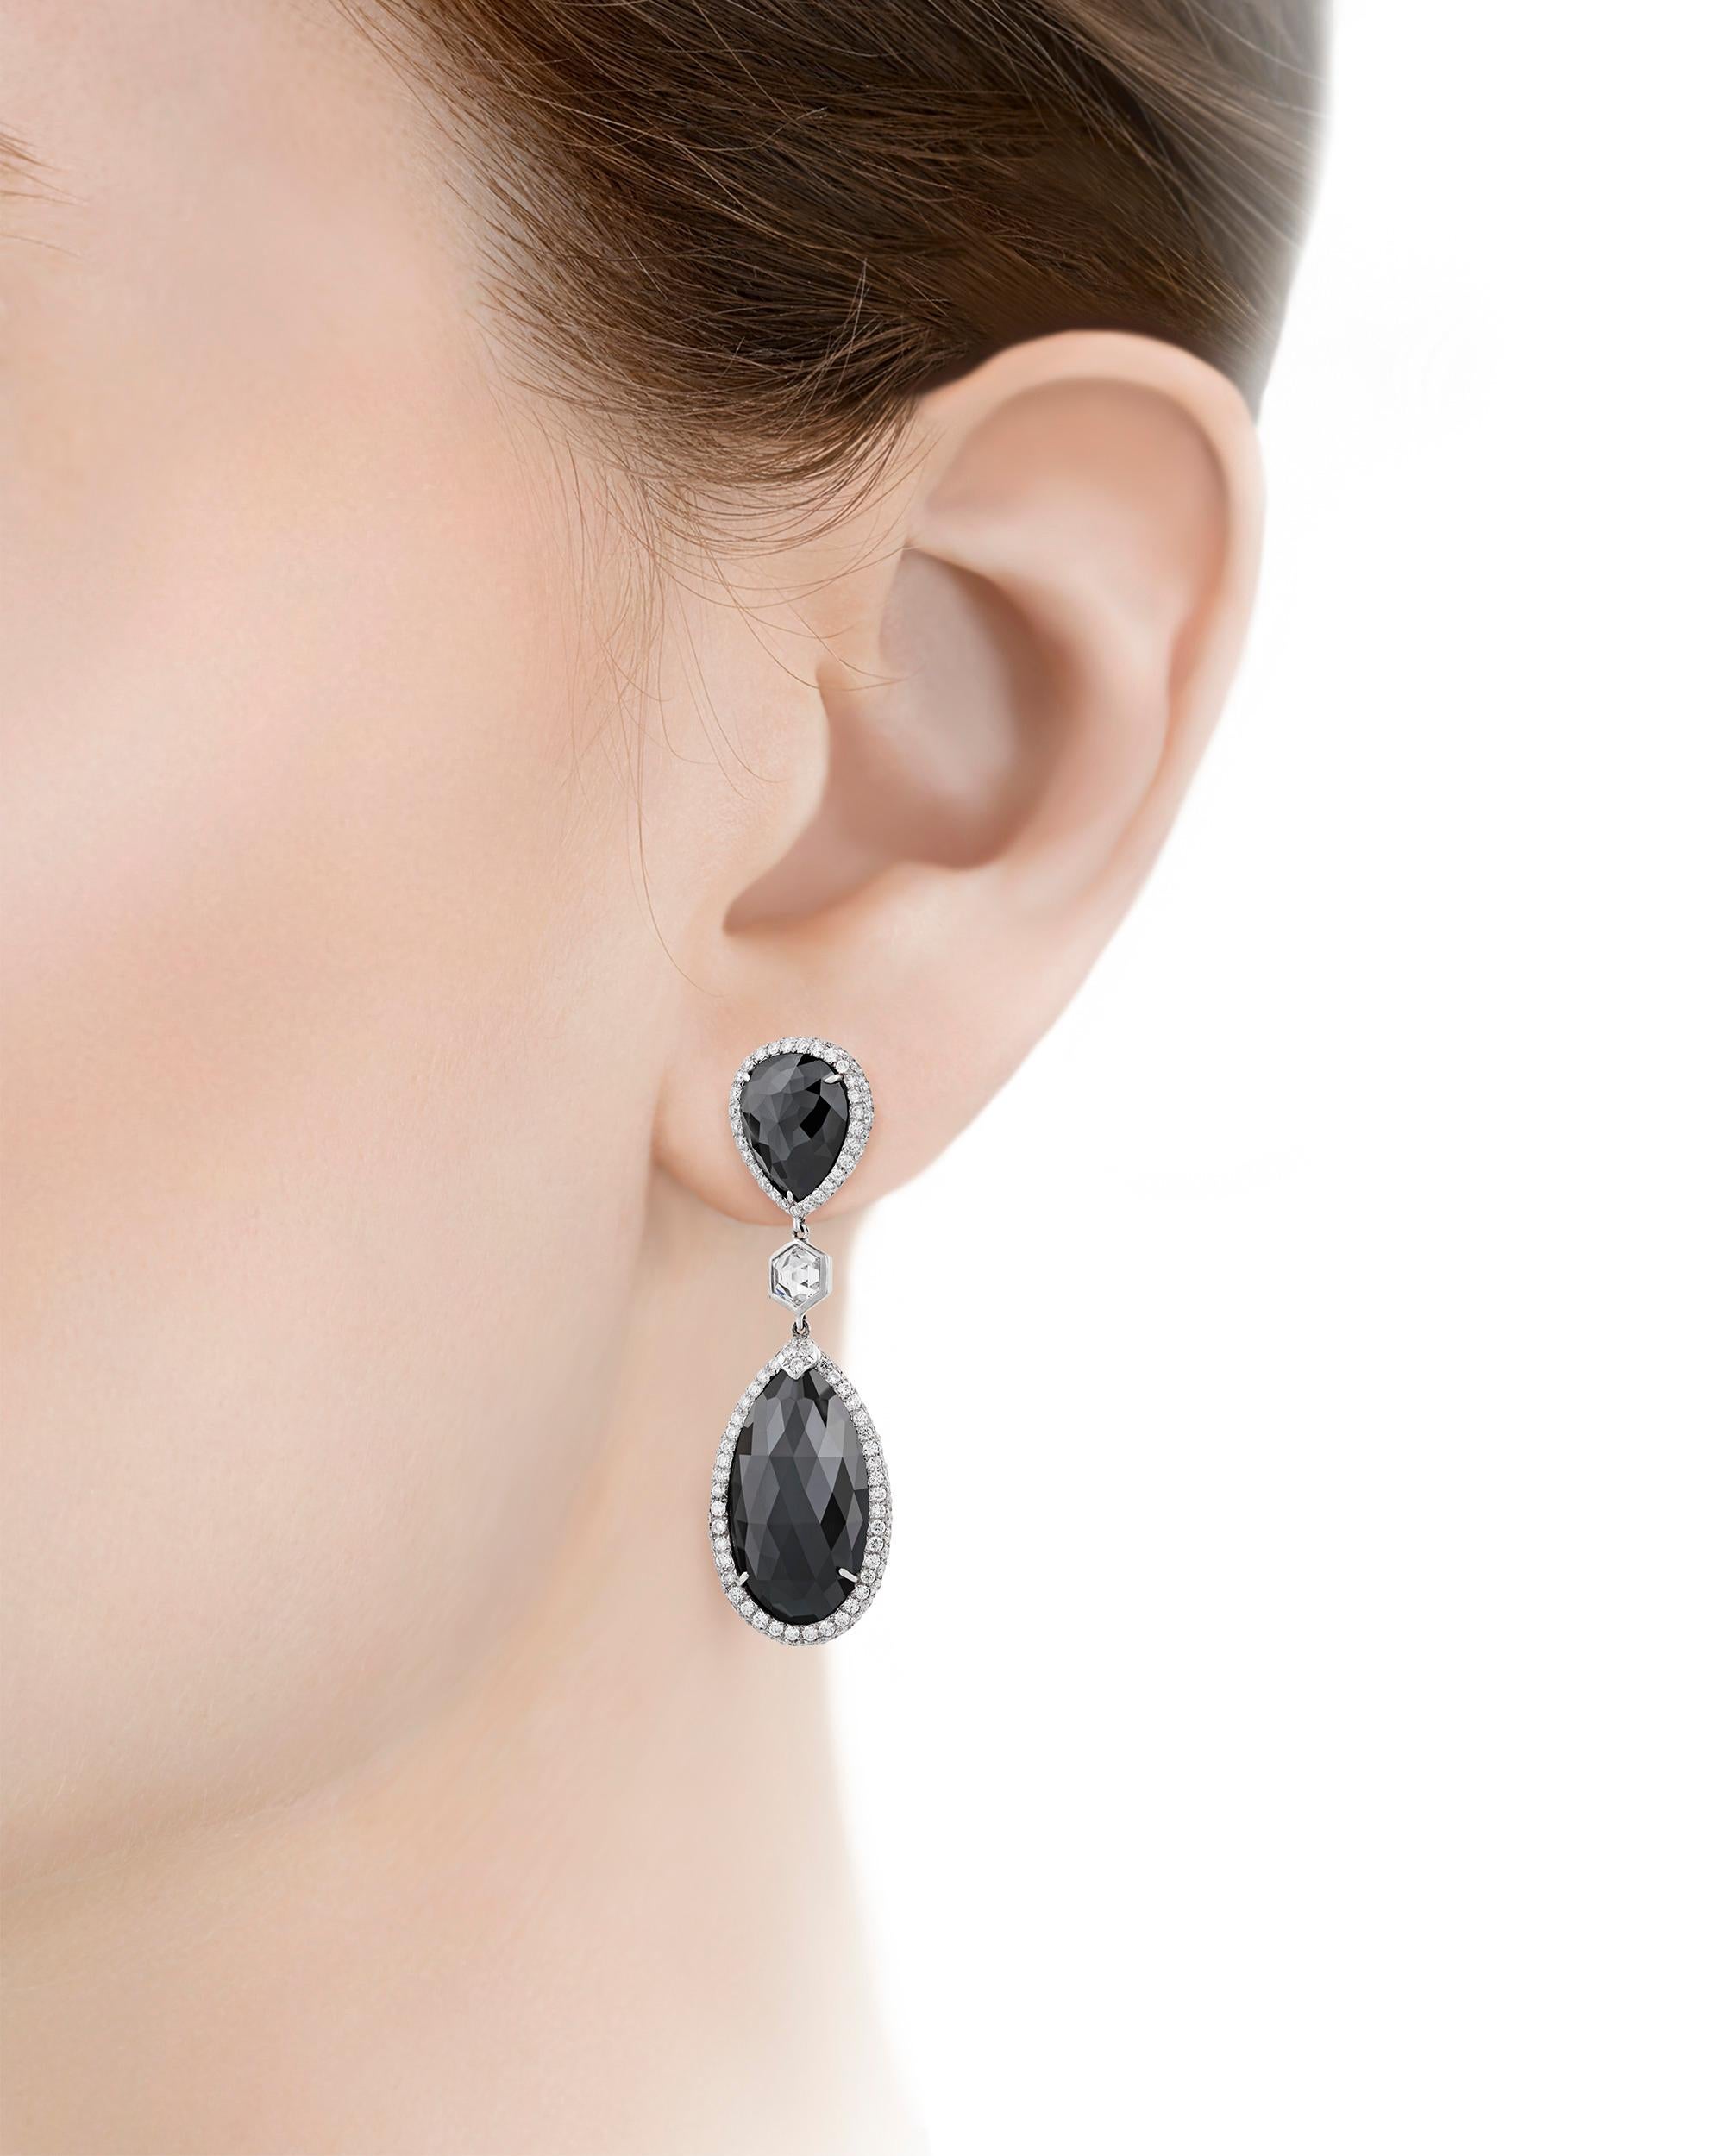 Dramatic yet elegant, these drop earrings feature four alluring black diamonds totaling approximately 32.00 carats. Held within a sophisticated 18K white gold setting accented with approximately 3.50 carats of sparkling white diamonds, these